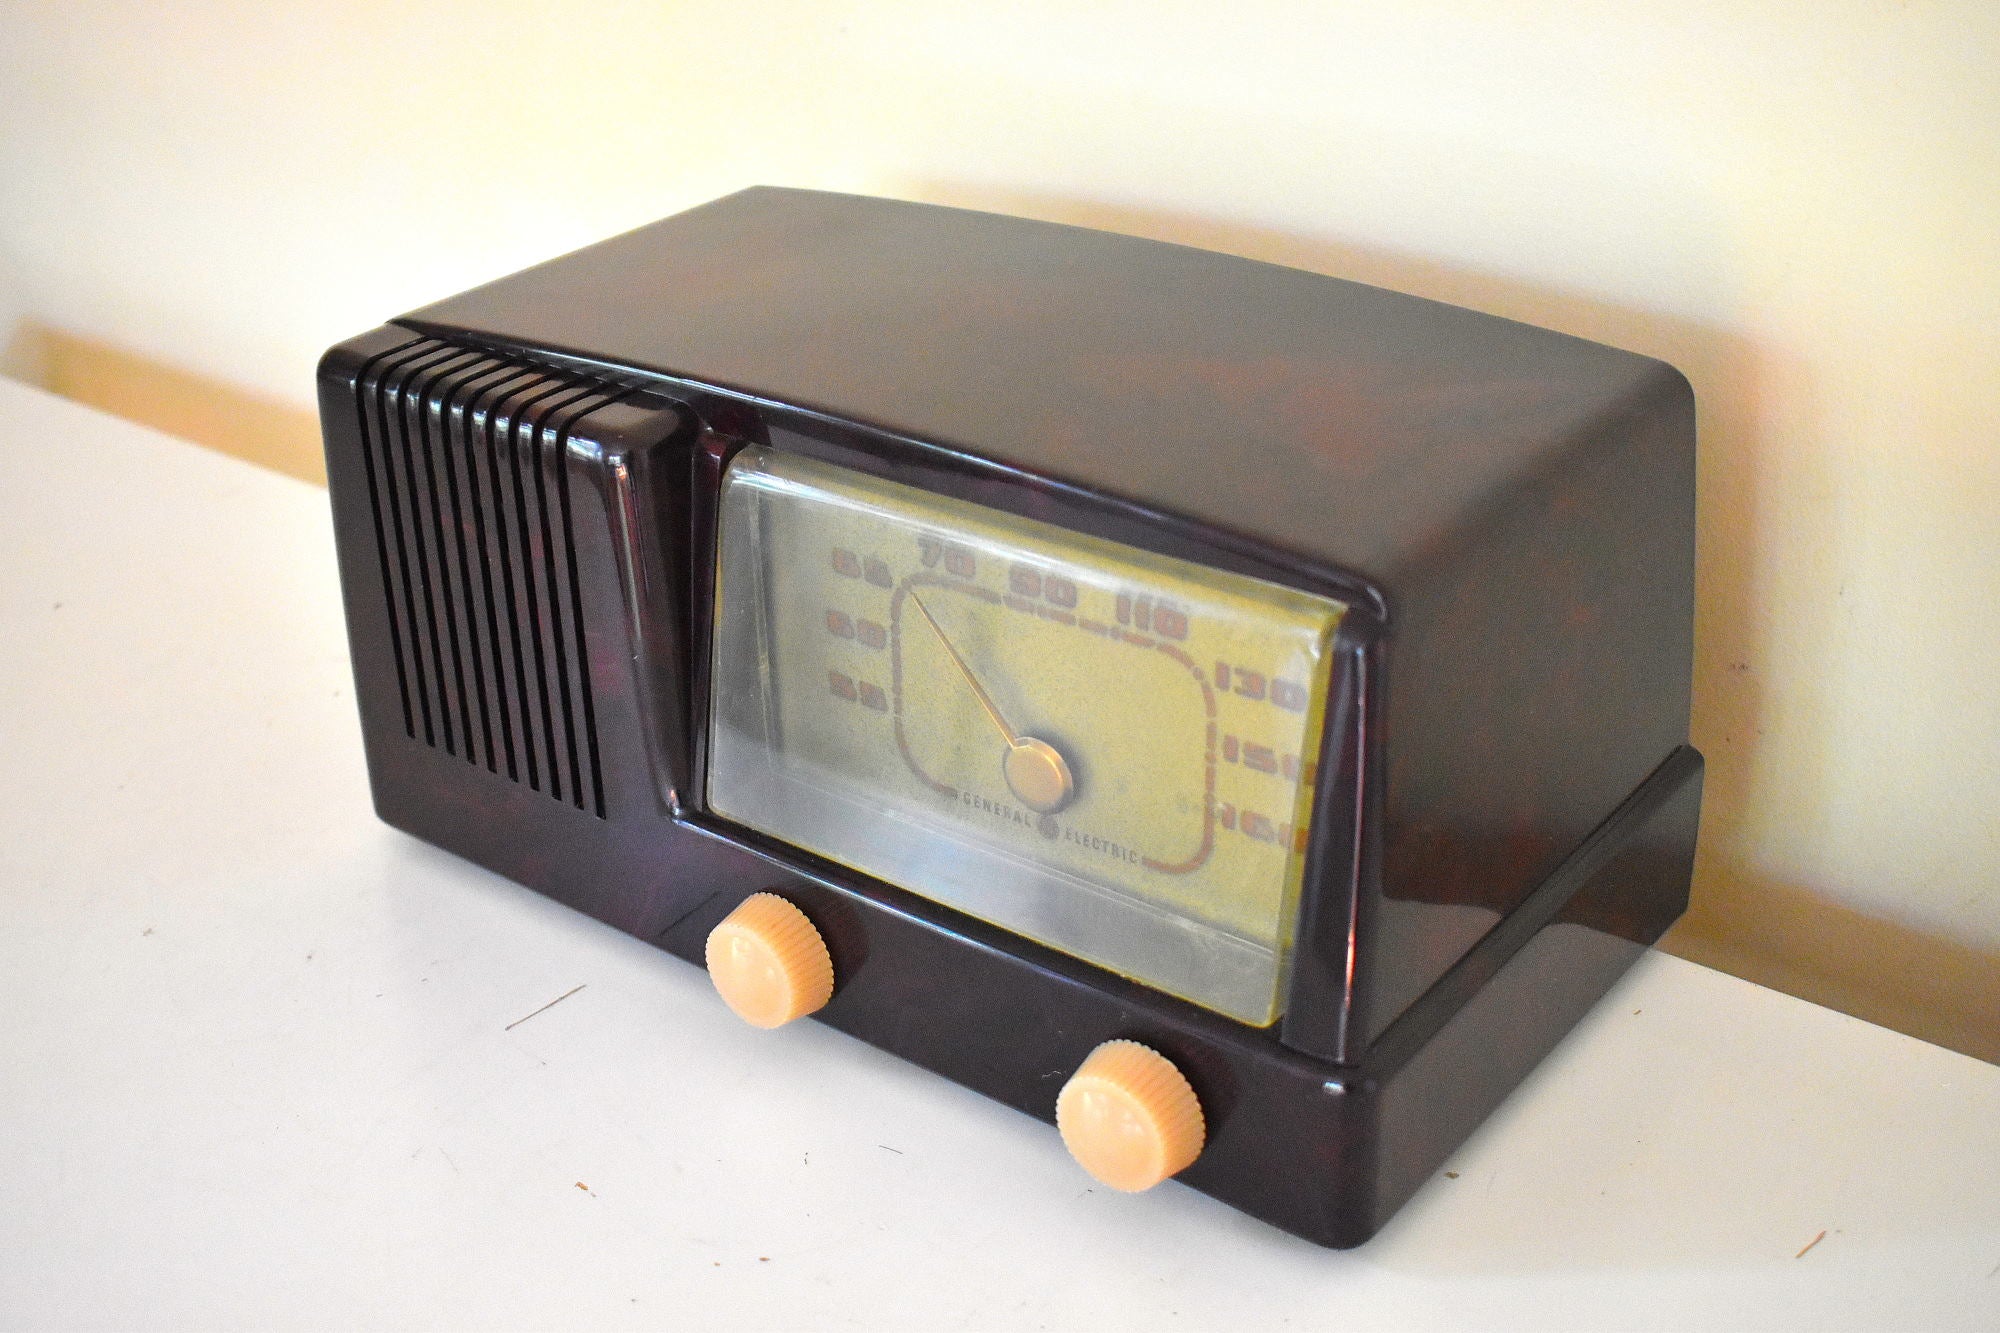 Bluetooth Ready To Go - Burgundy Brown Swirly 1950 General Electric Model 400  Vacuum Tube Radio Excellent Condition Great Sounding!